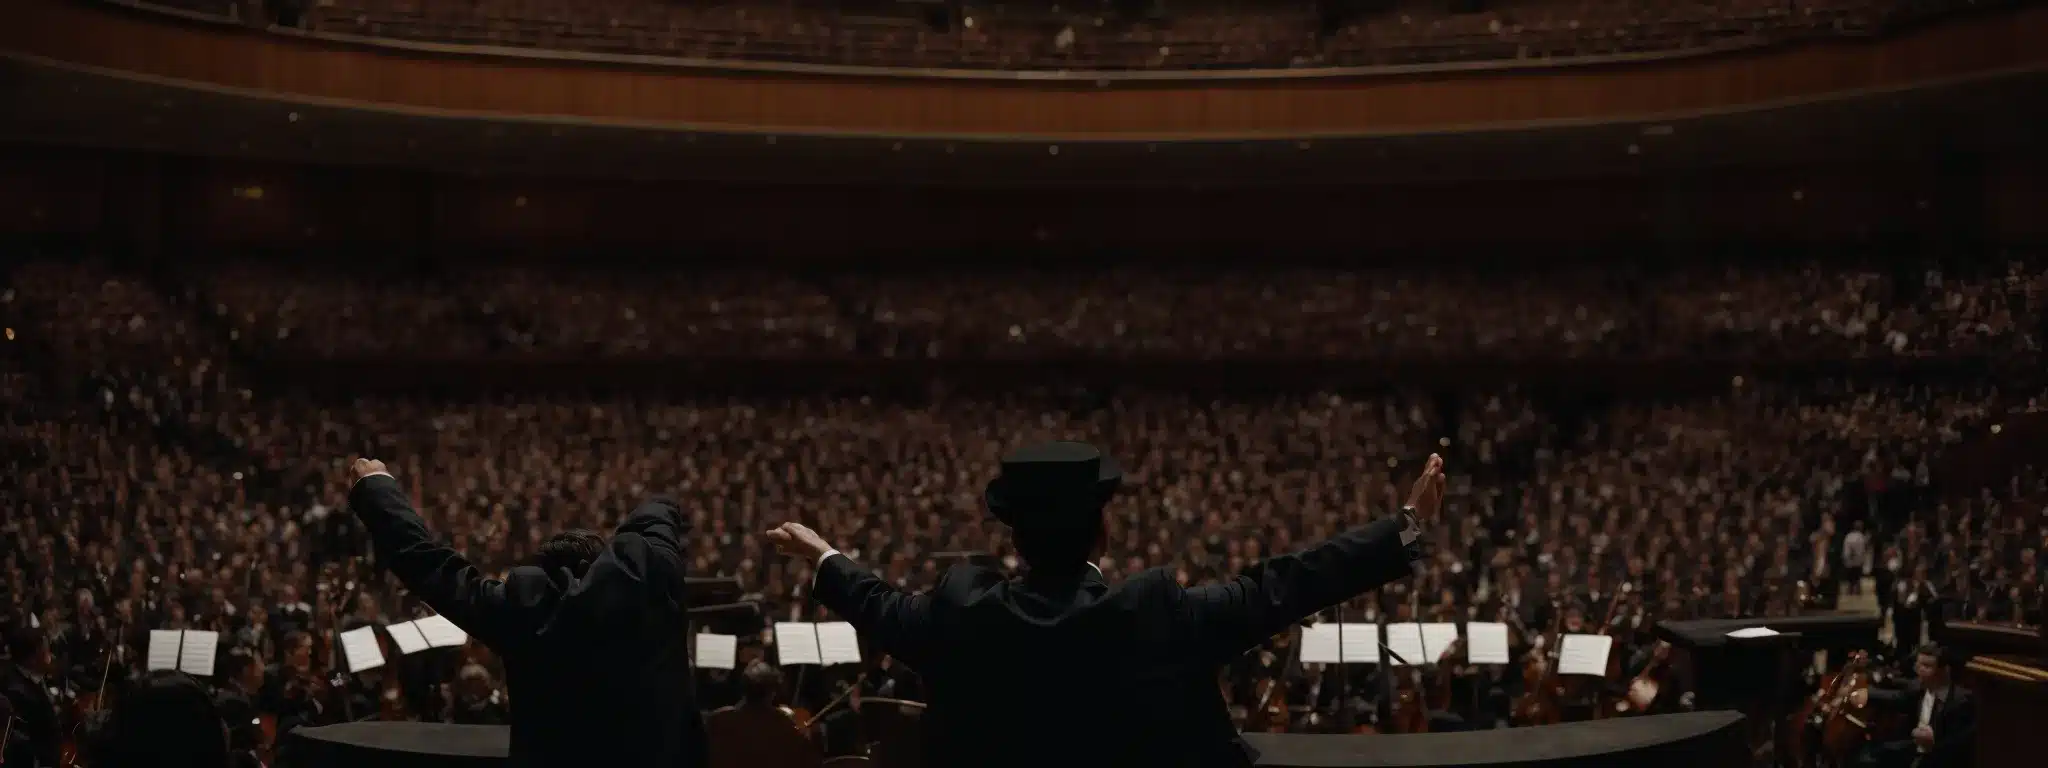 A Conductor Stands On The Podium, Arms Raised, Commanding An Orchestra In A Grand Auditorium Filled With Anticipation.